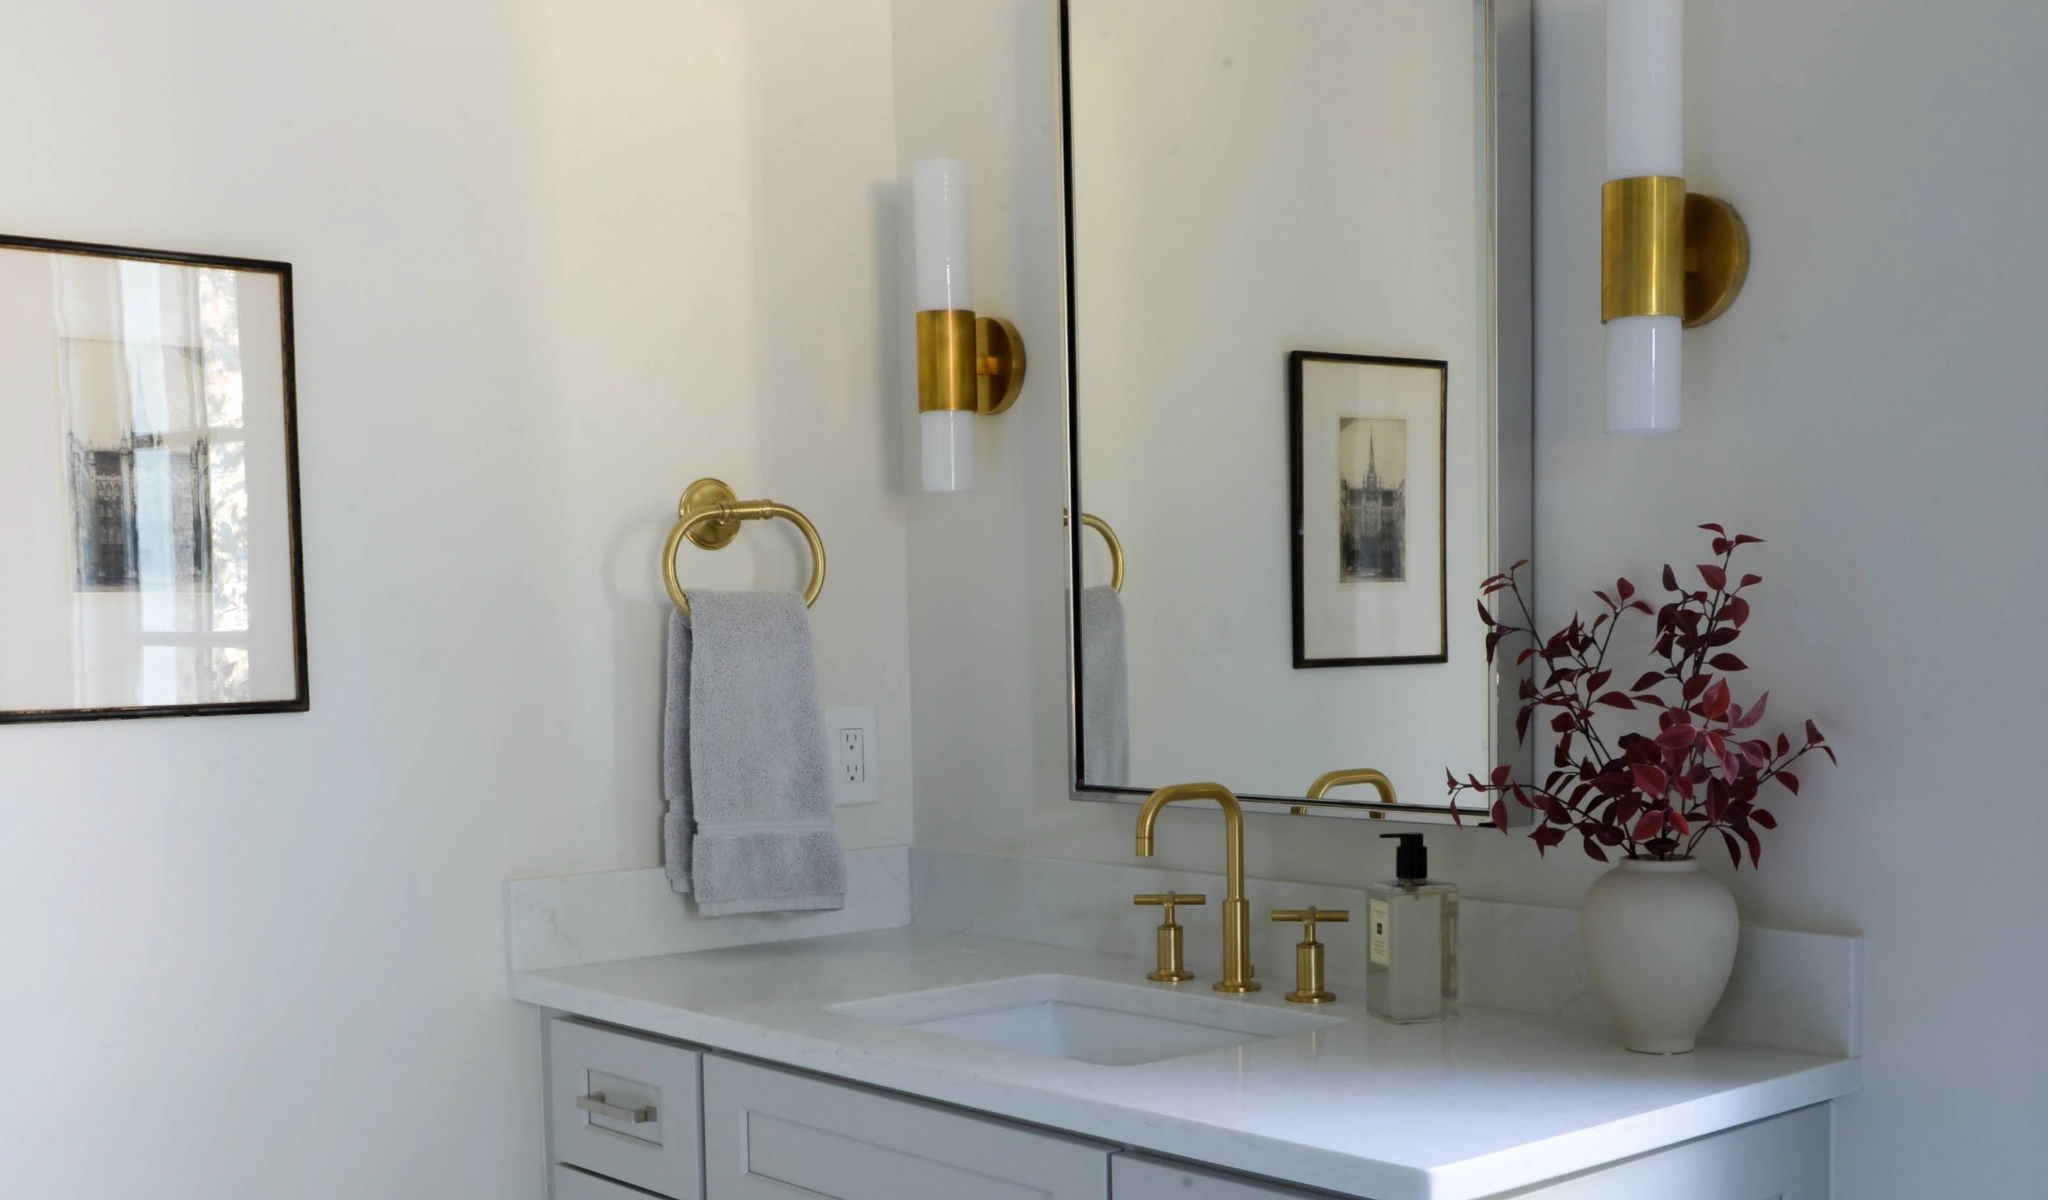 A white bathroom features a luxurious gold vanity and mirror.